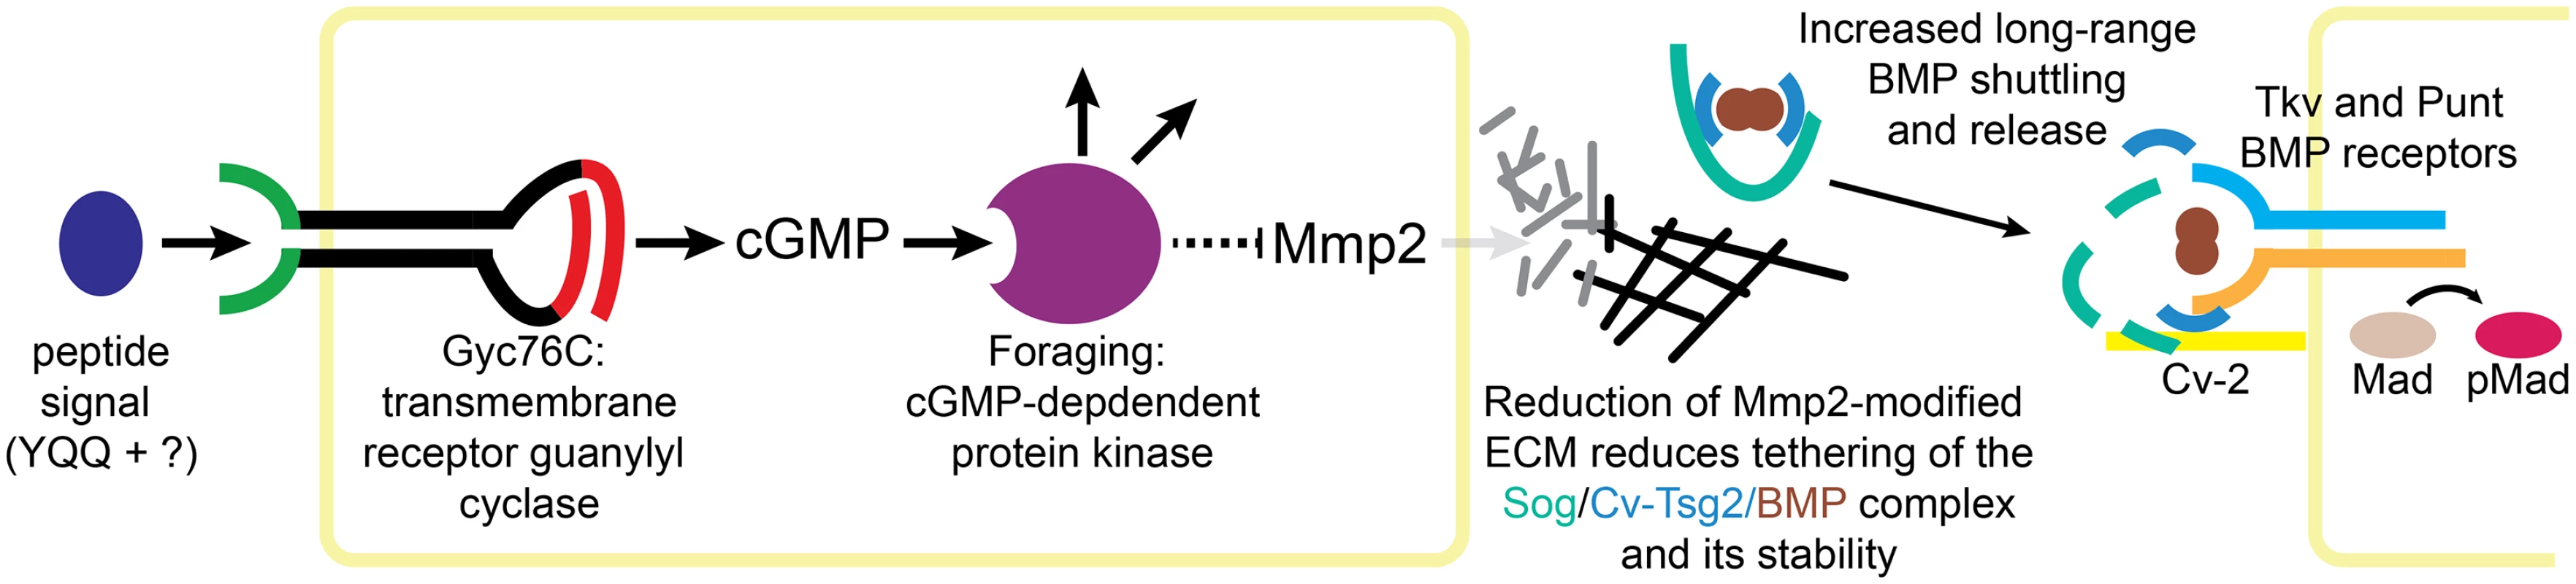 Model of Gyc76C and For in Mmp2-mediated ECM organization and BMP signaling.